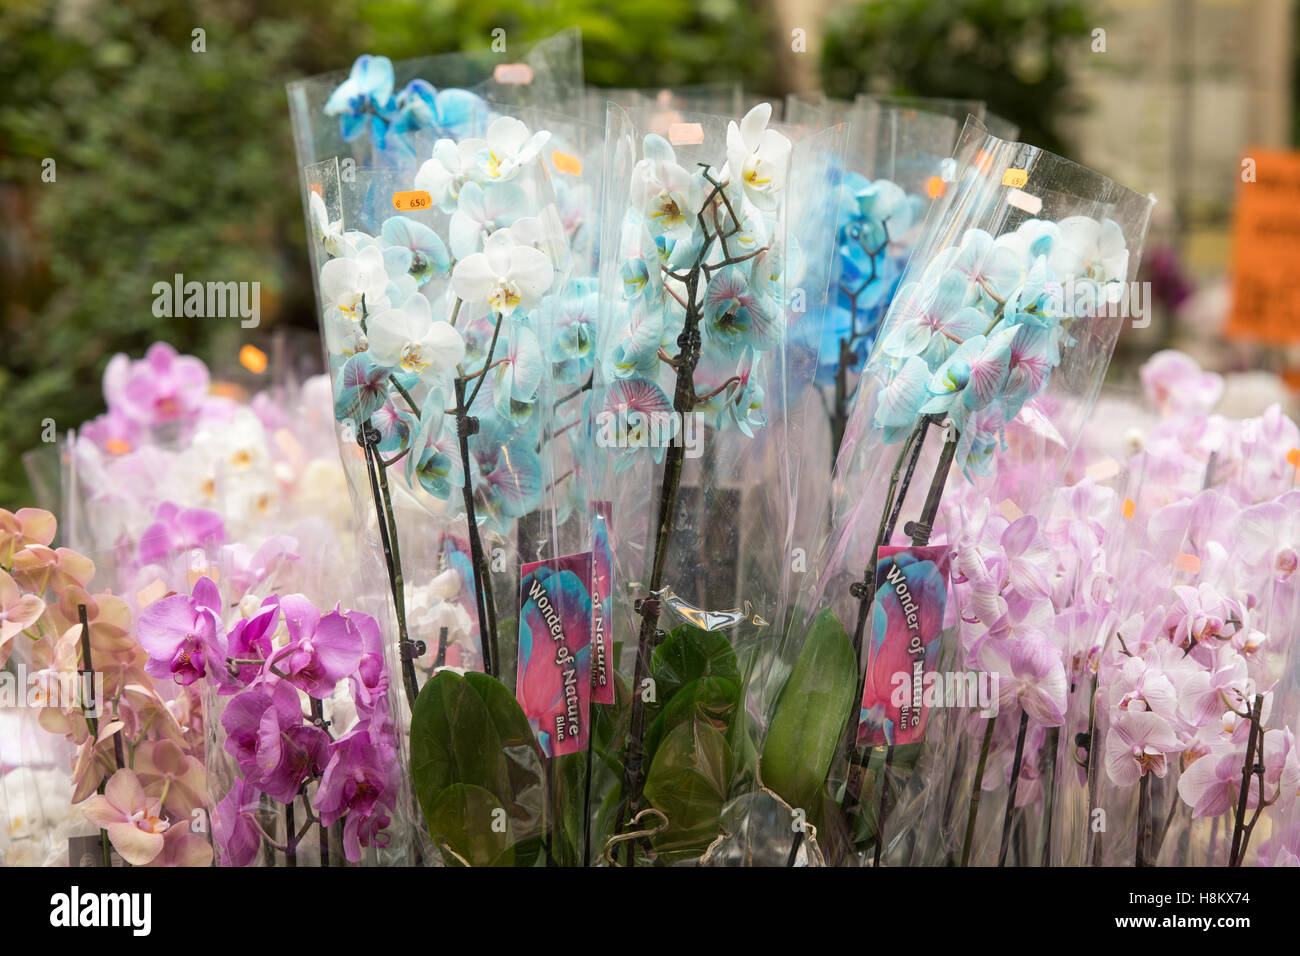 Amsterdam, Netherlands close up of different colored potted Orchid flowers for sale in an outdoor market. Stock Photo